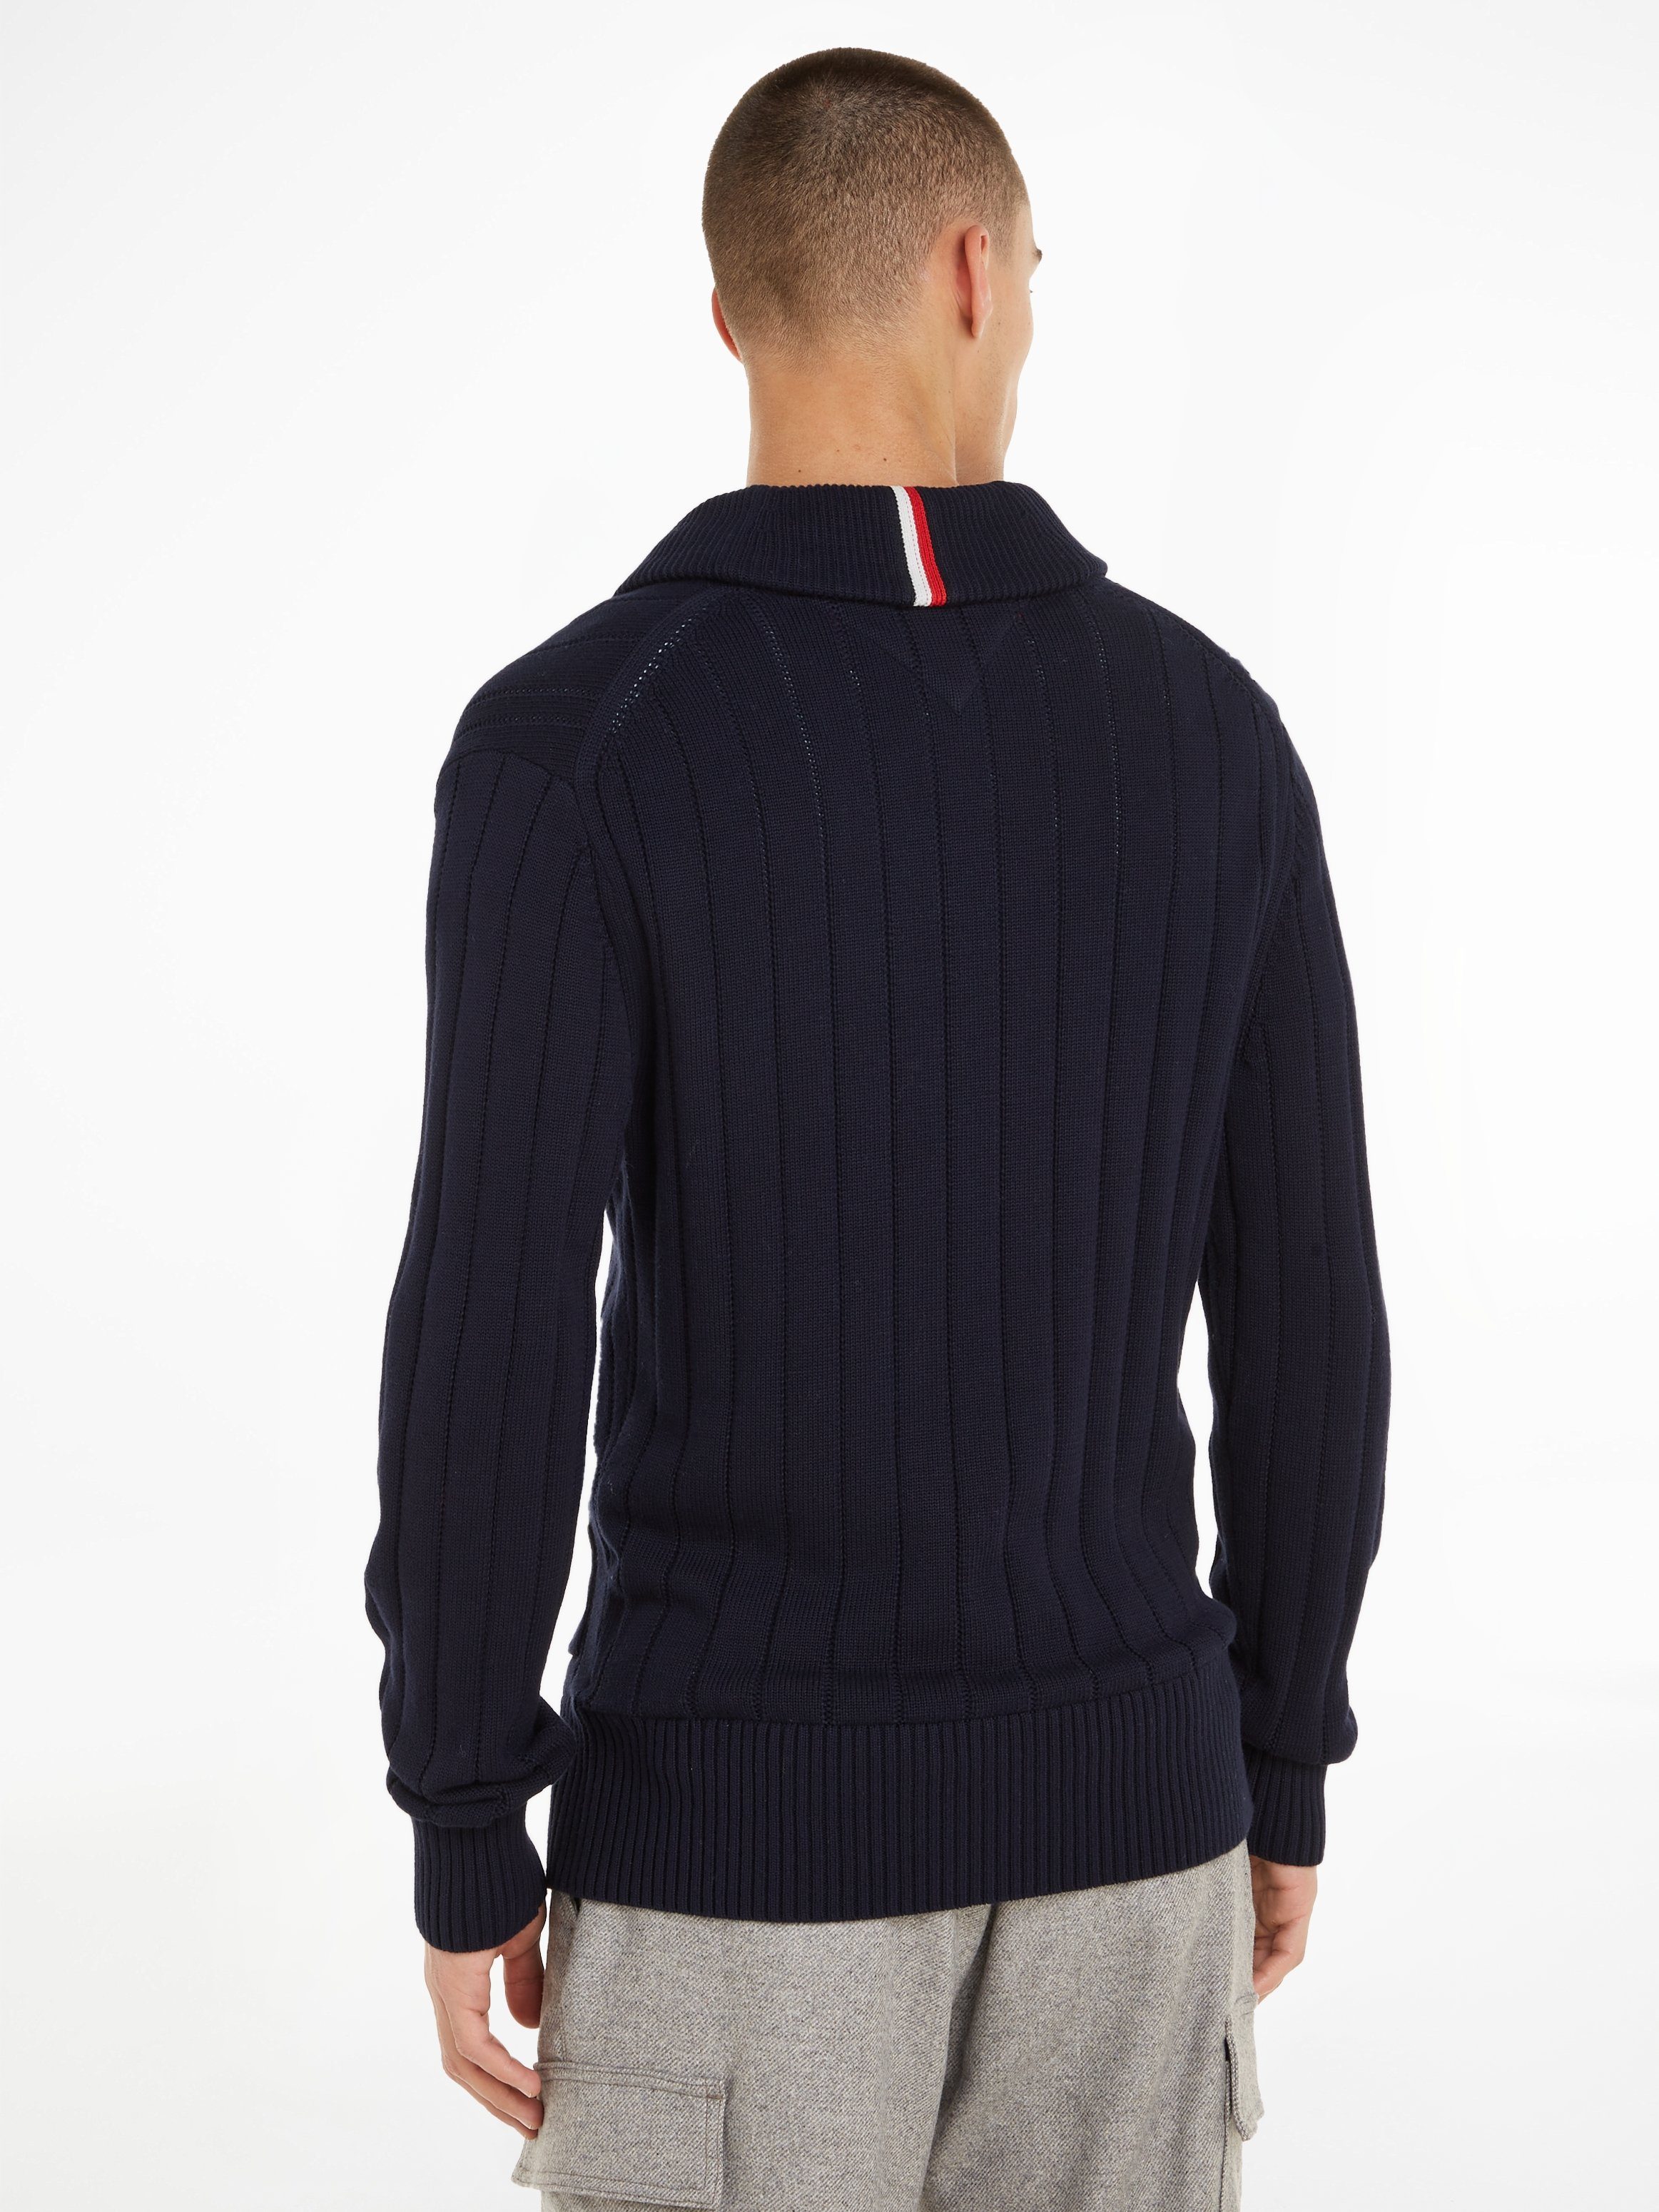 CABLE Strickjacke CLASSIC Hilfiger Tommy SHAWL